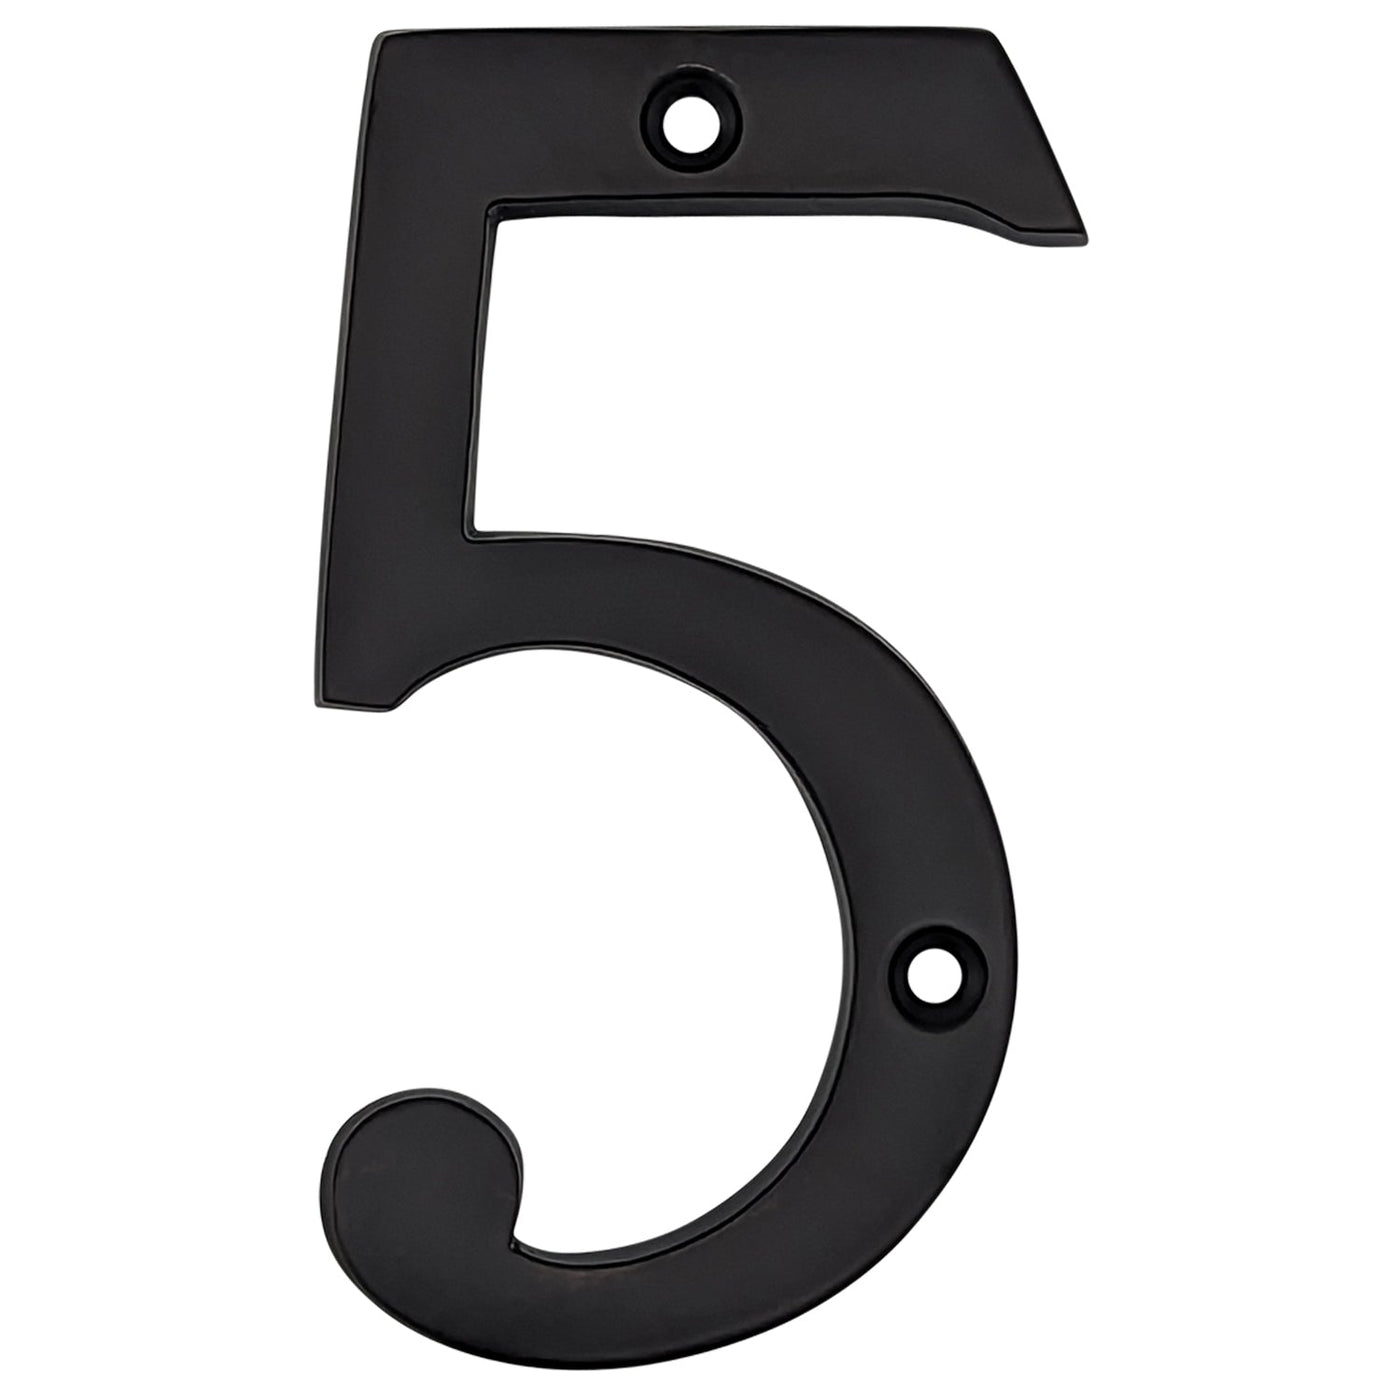 4 Inch Tall House Number 5